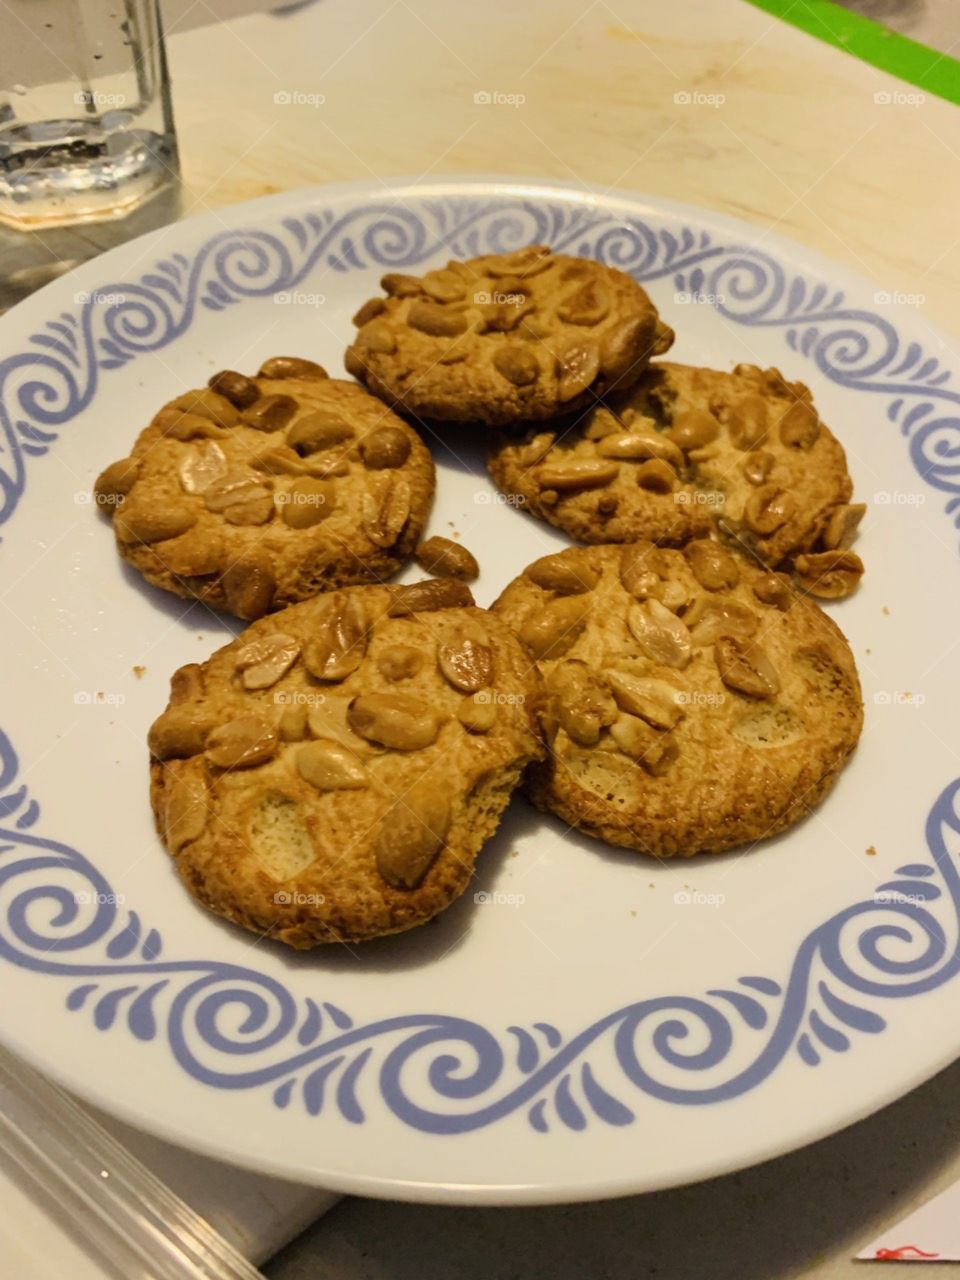 Home baked cookies with nuts